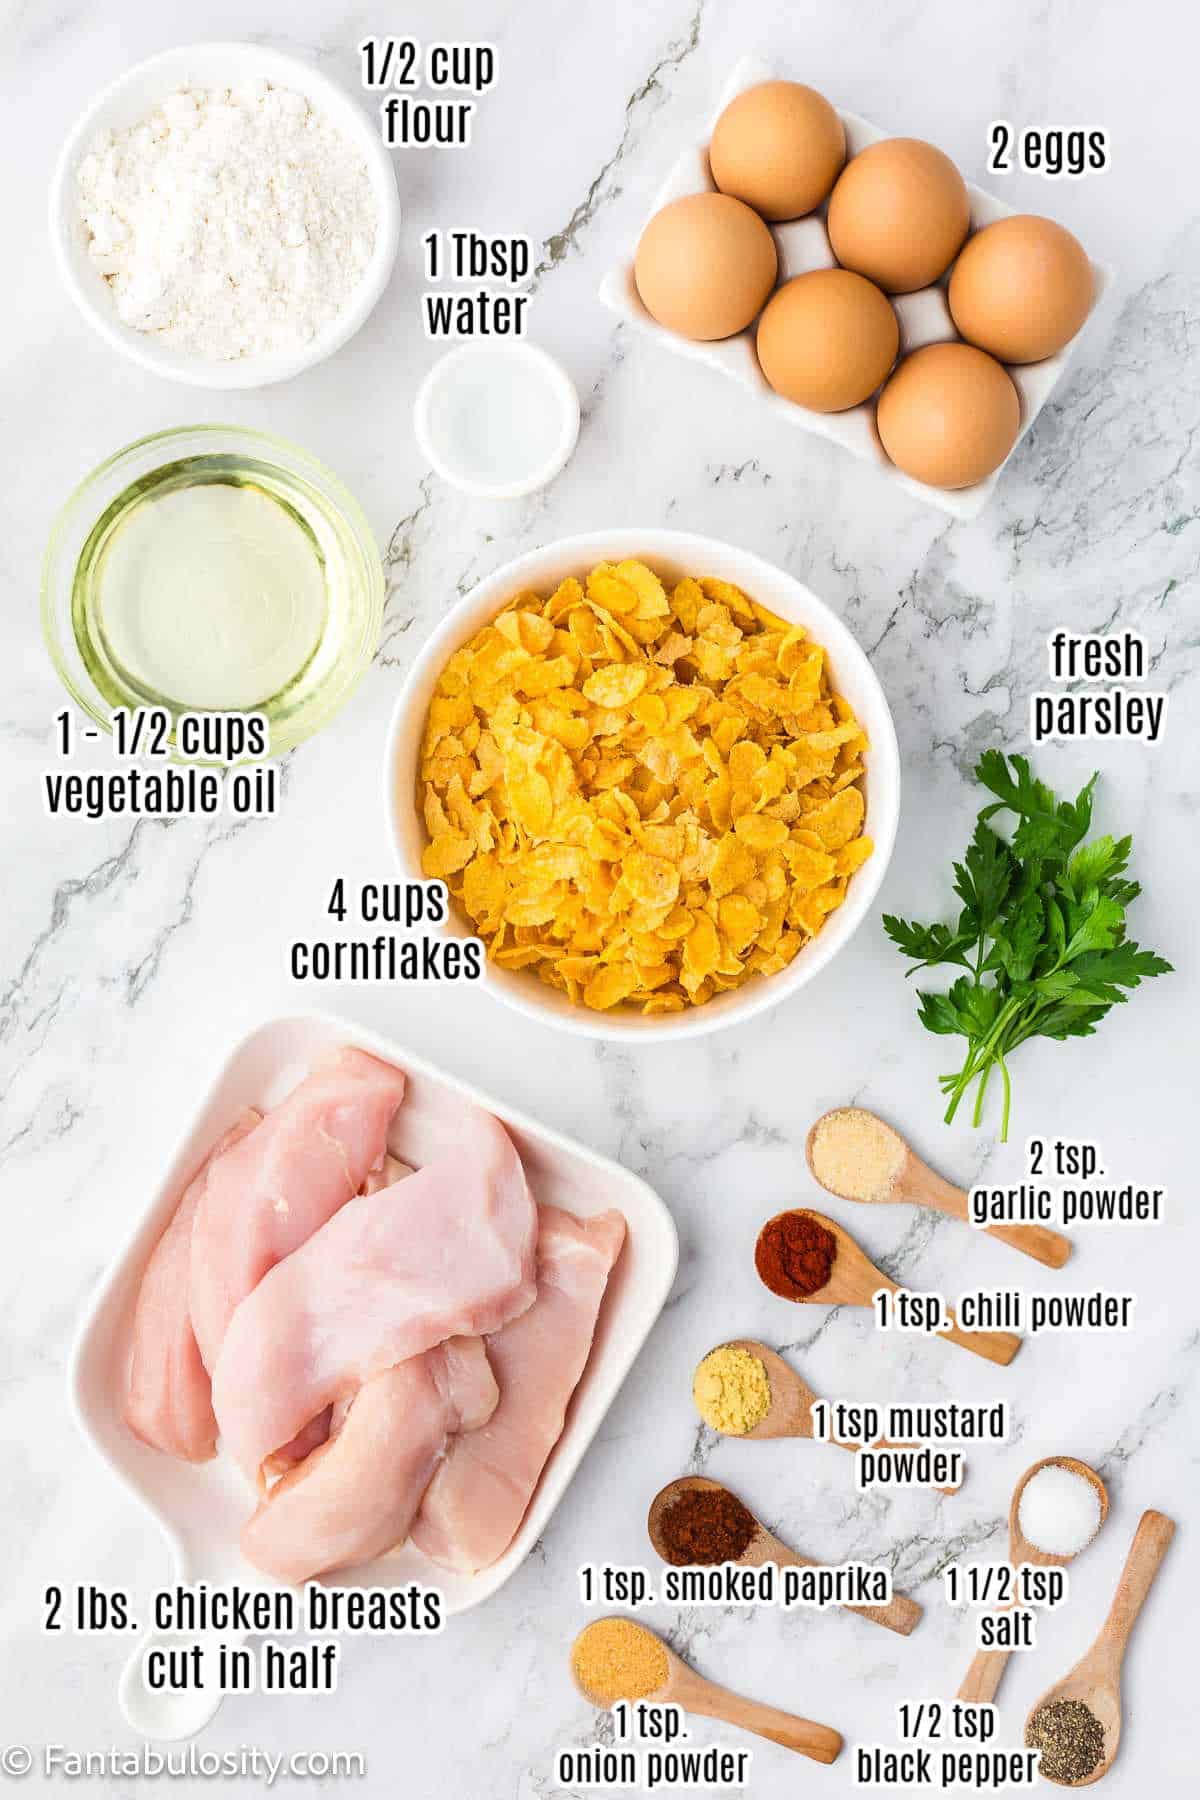 Labeled ingredients for cornflake fried chicken.